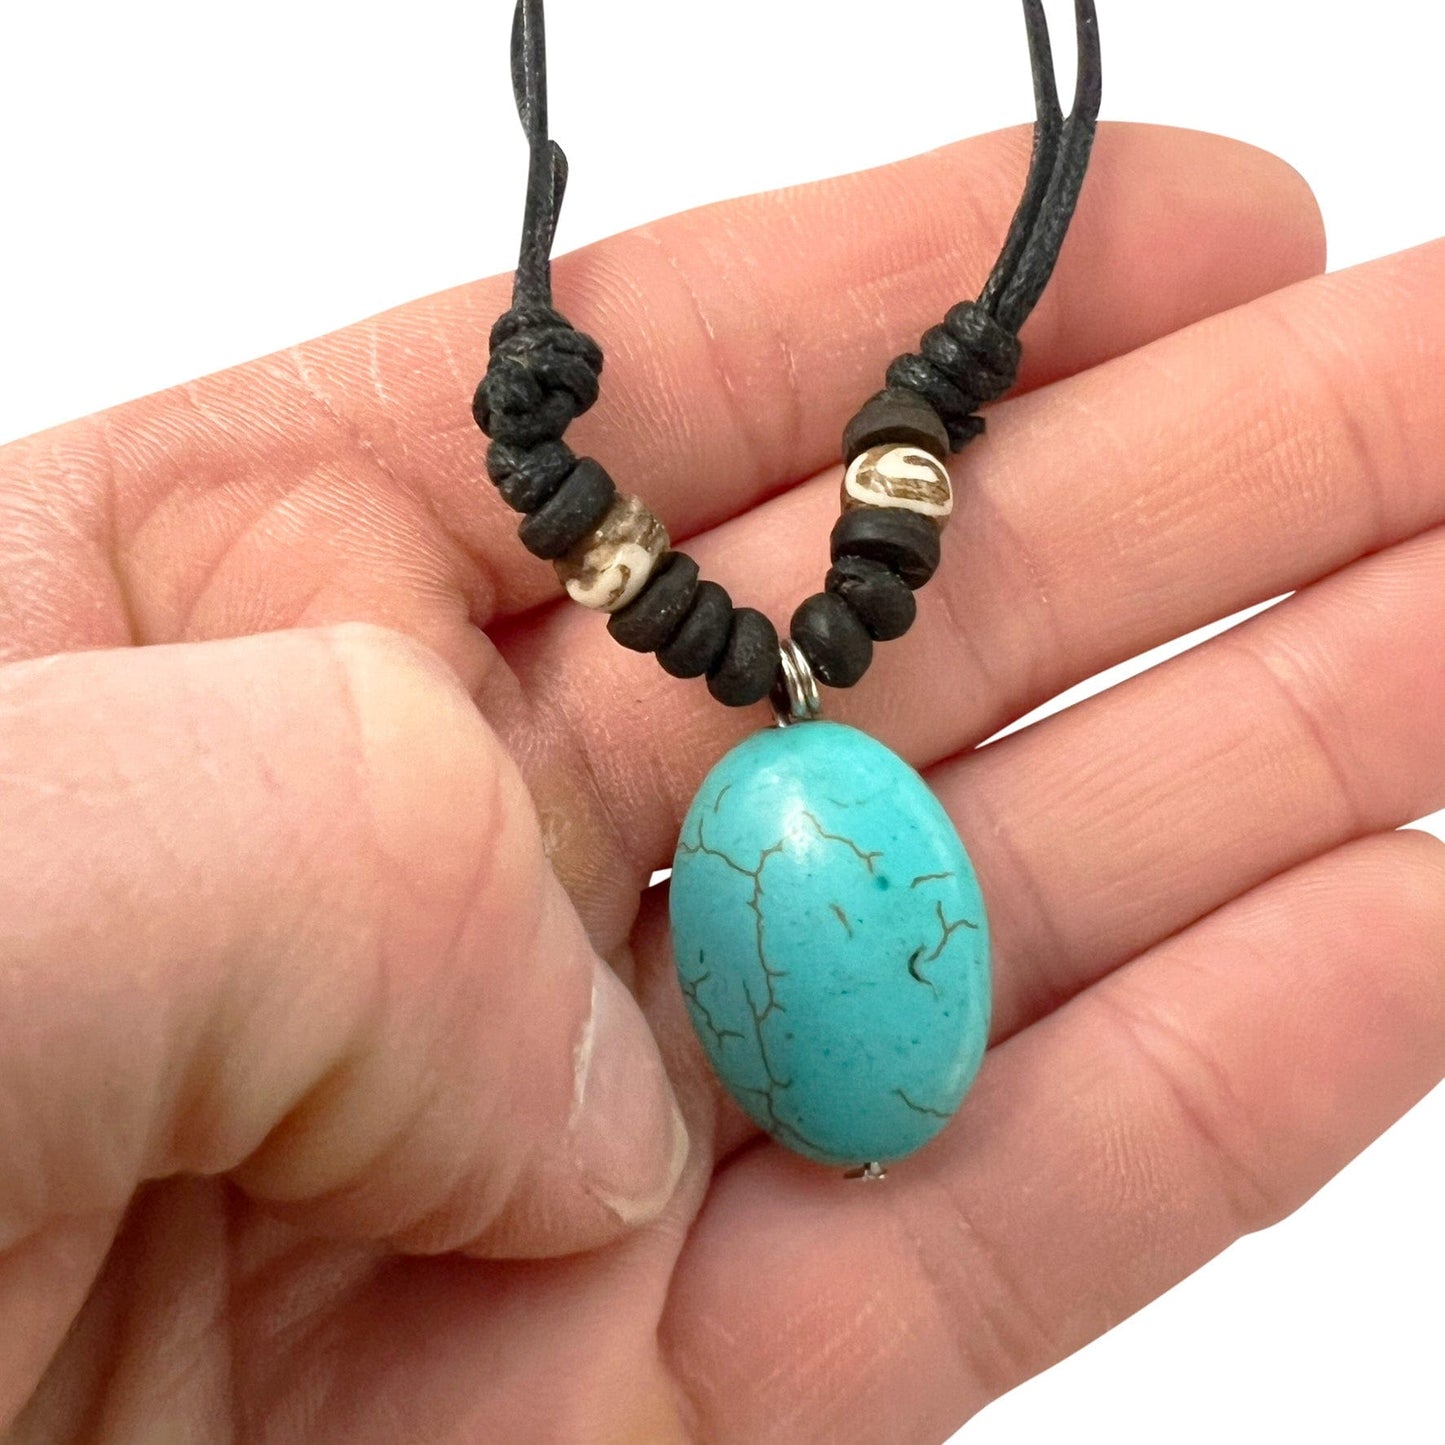 Turquoise Pendant Beads Necklace Black Cotton Cord Chain Mens Womens Jewellery